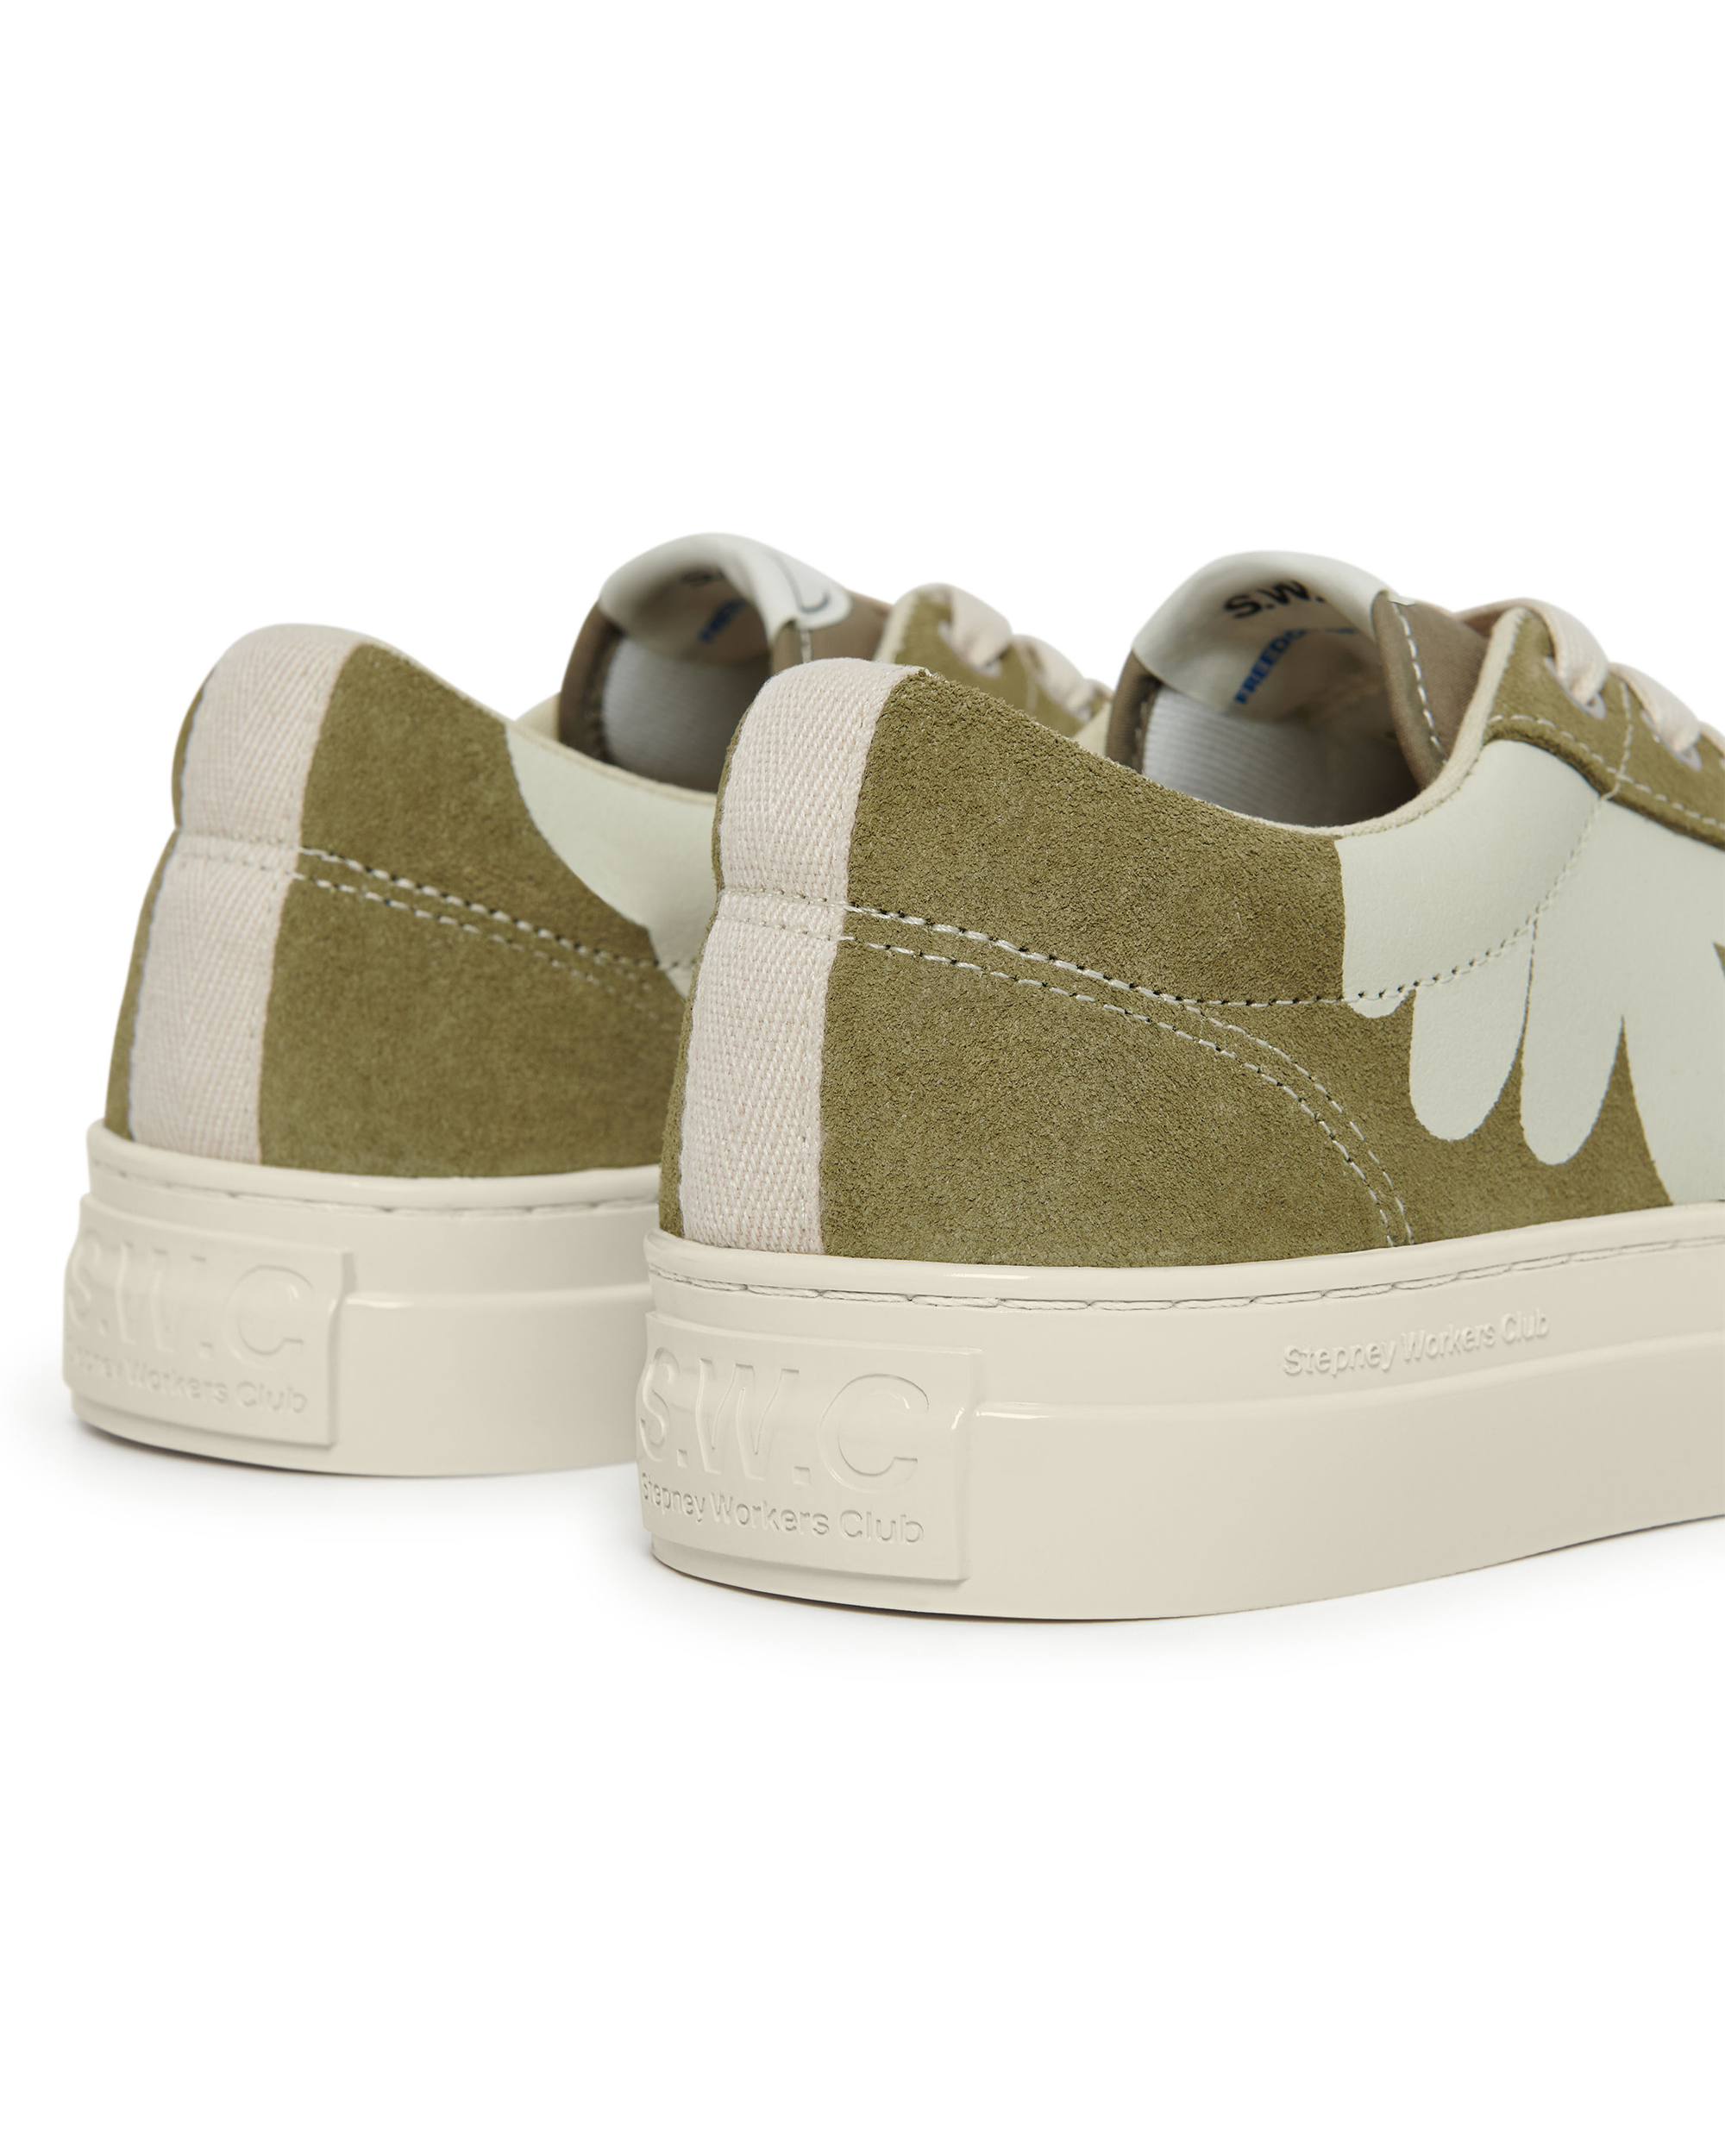 Dellow Shroom Hands Suede - Moss / White